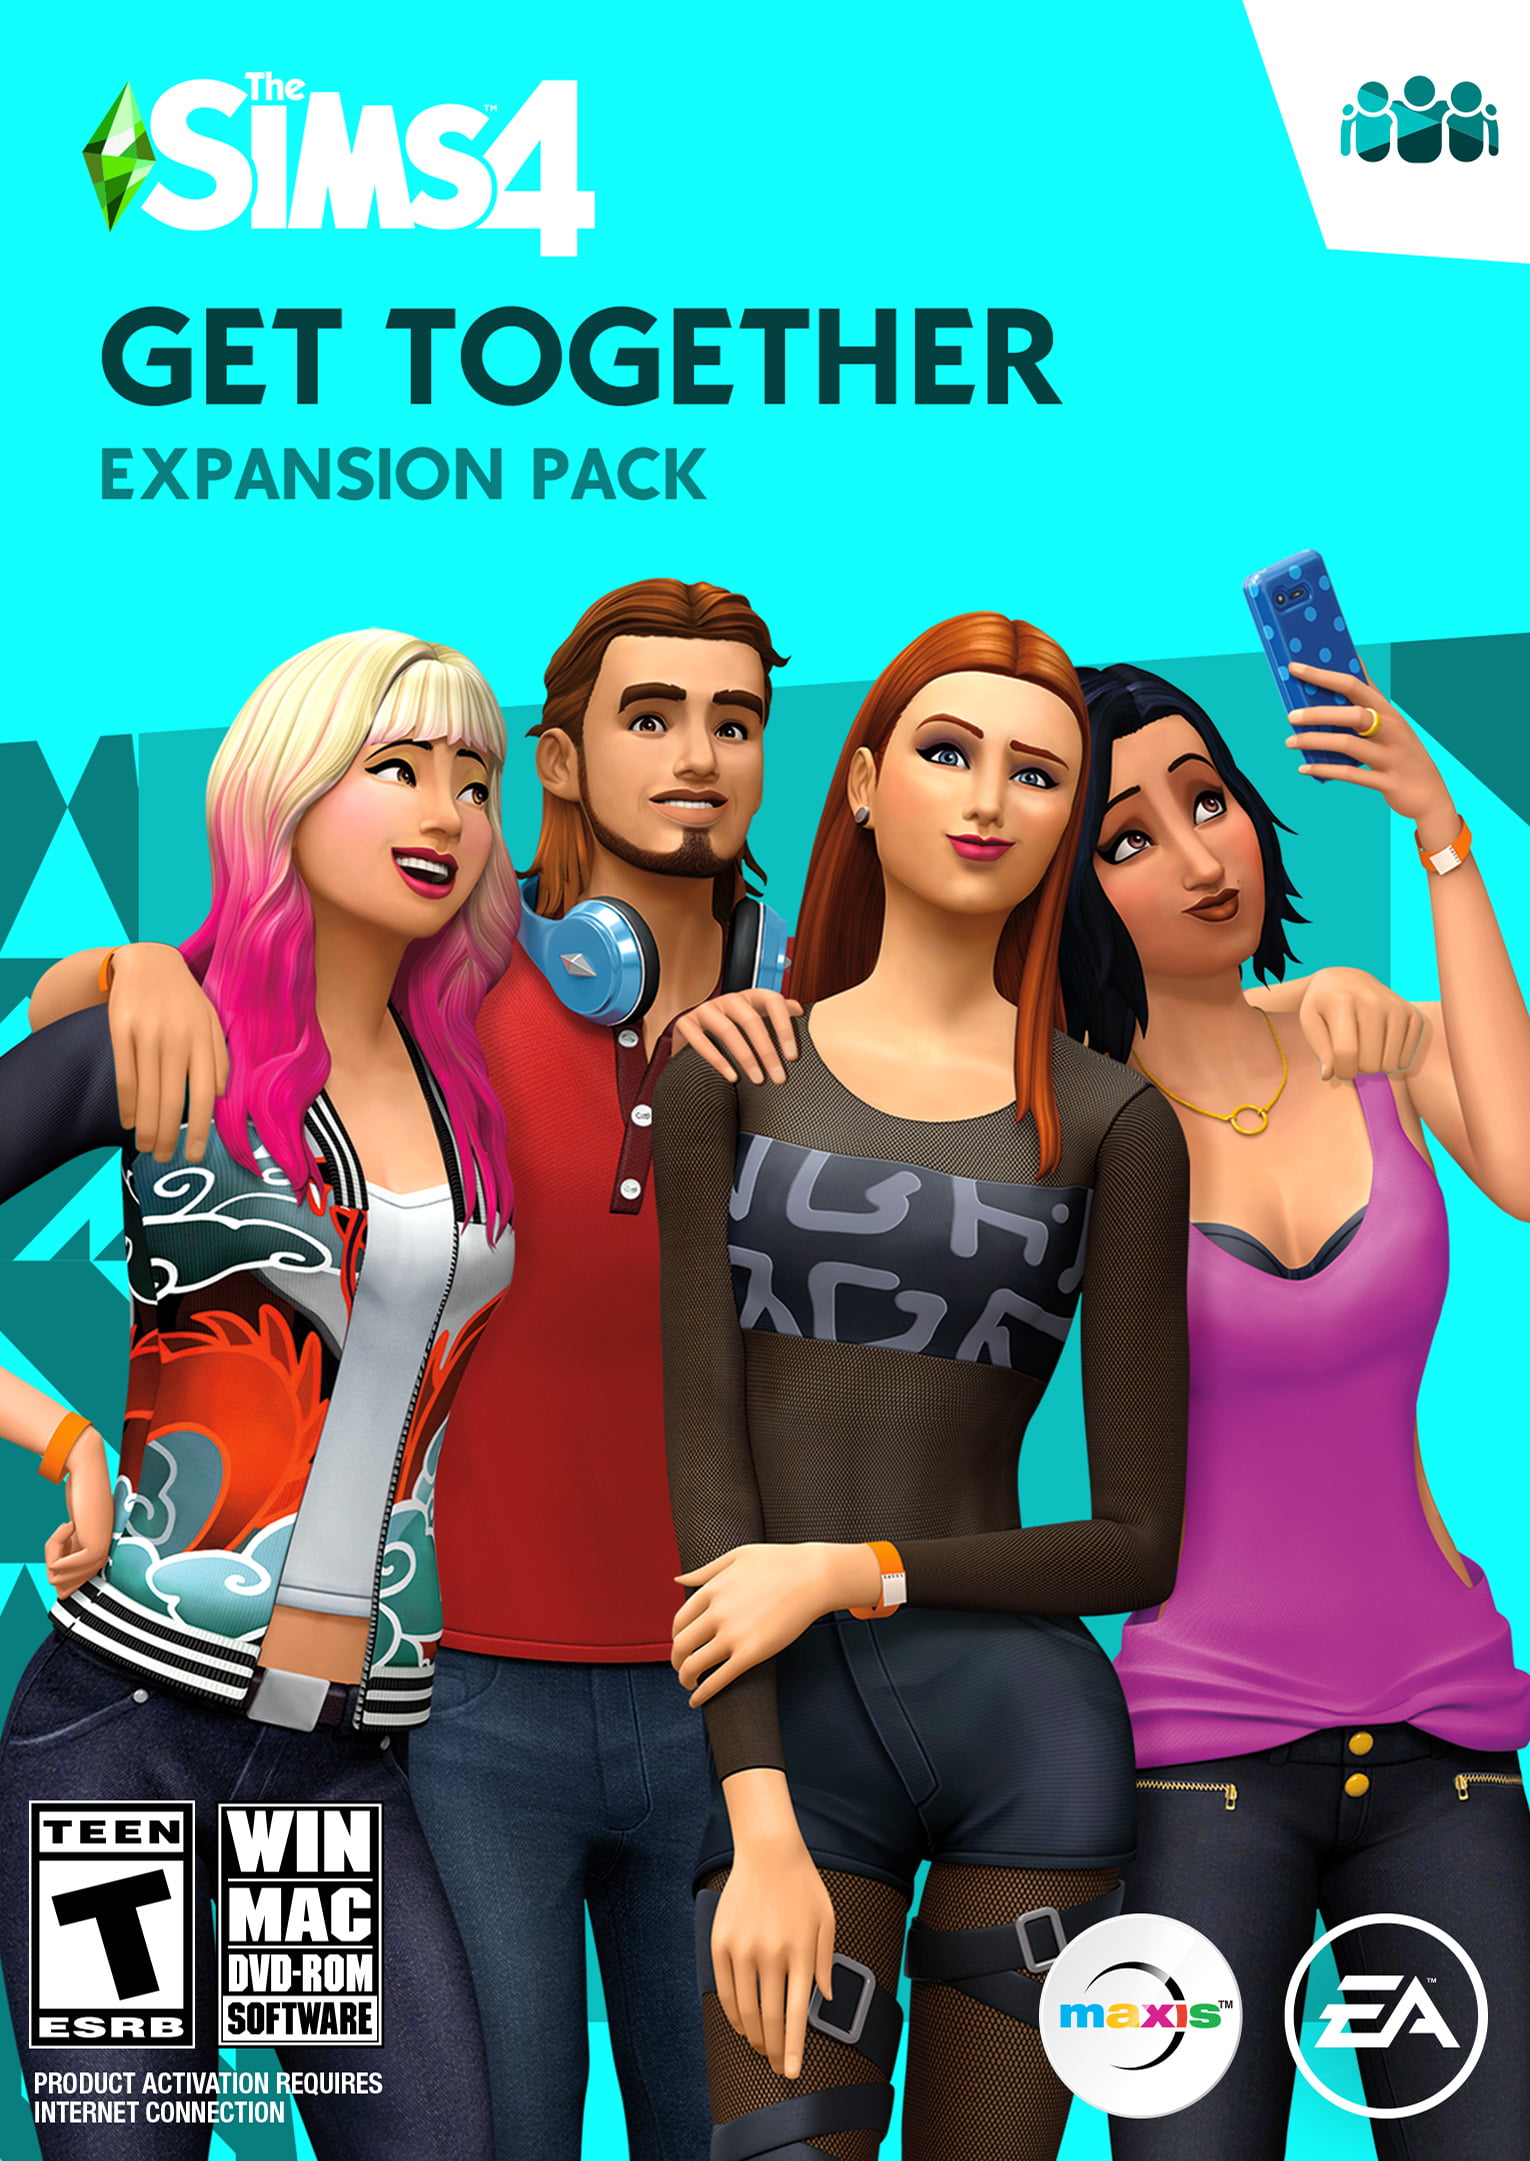 Get to Work expansion pack - Games4theworld Downloads